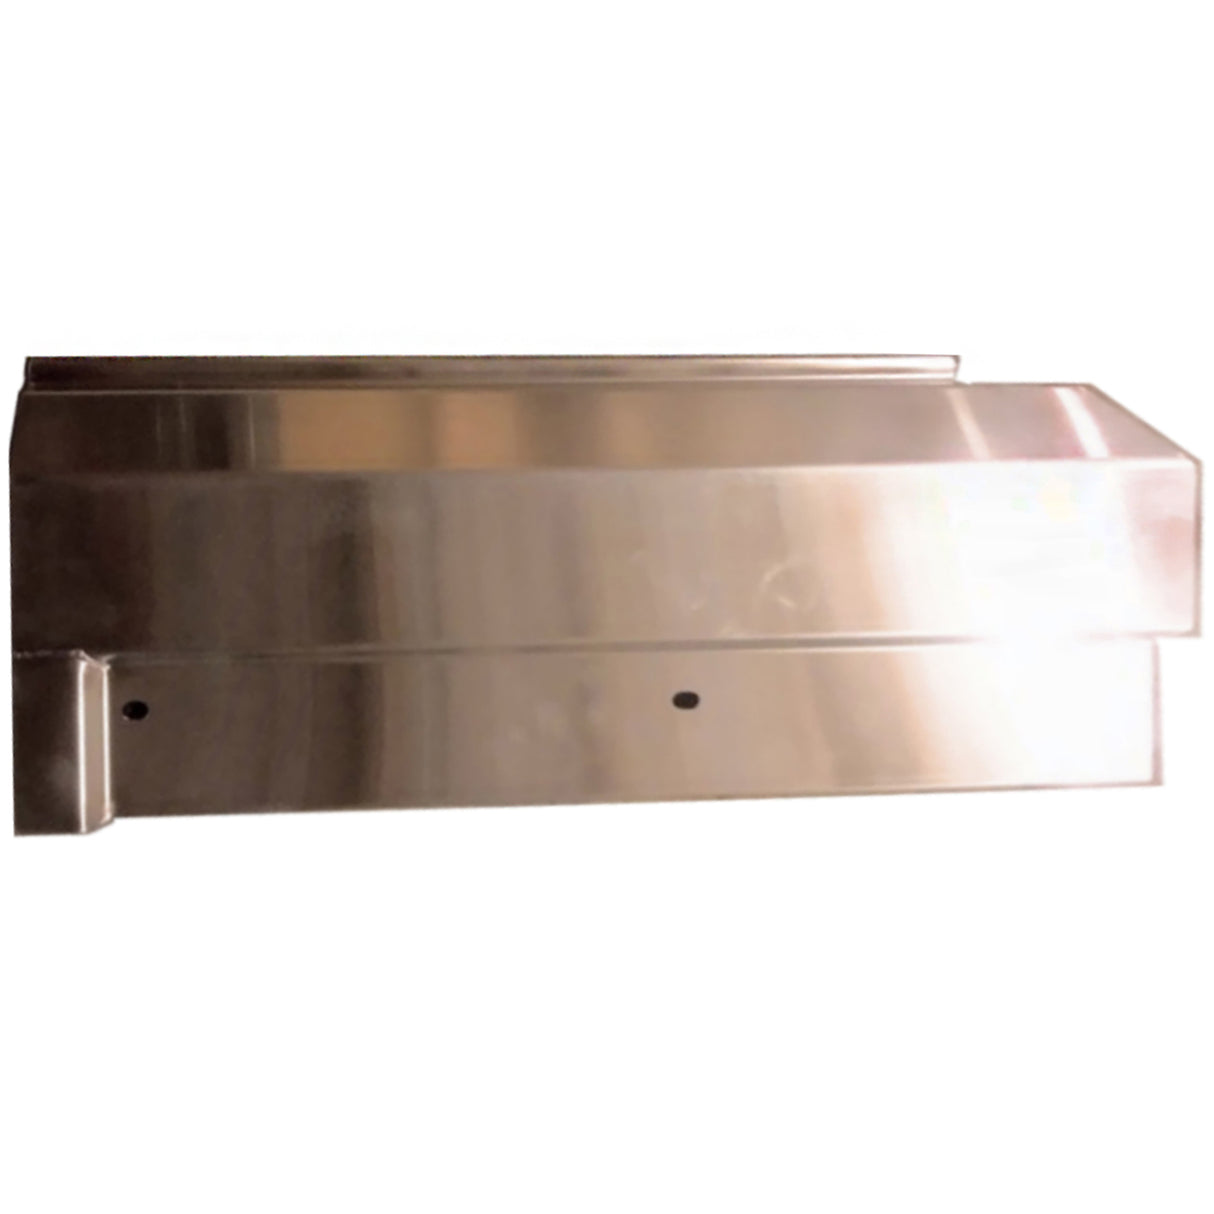 Stainless Steel Arm Cover Plate RIGHT Heavy Duty Lely A3, A4 and A5 Corr. 5.1103.1266.0